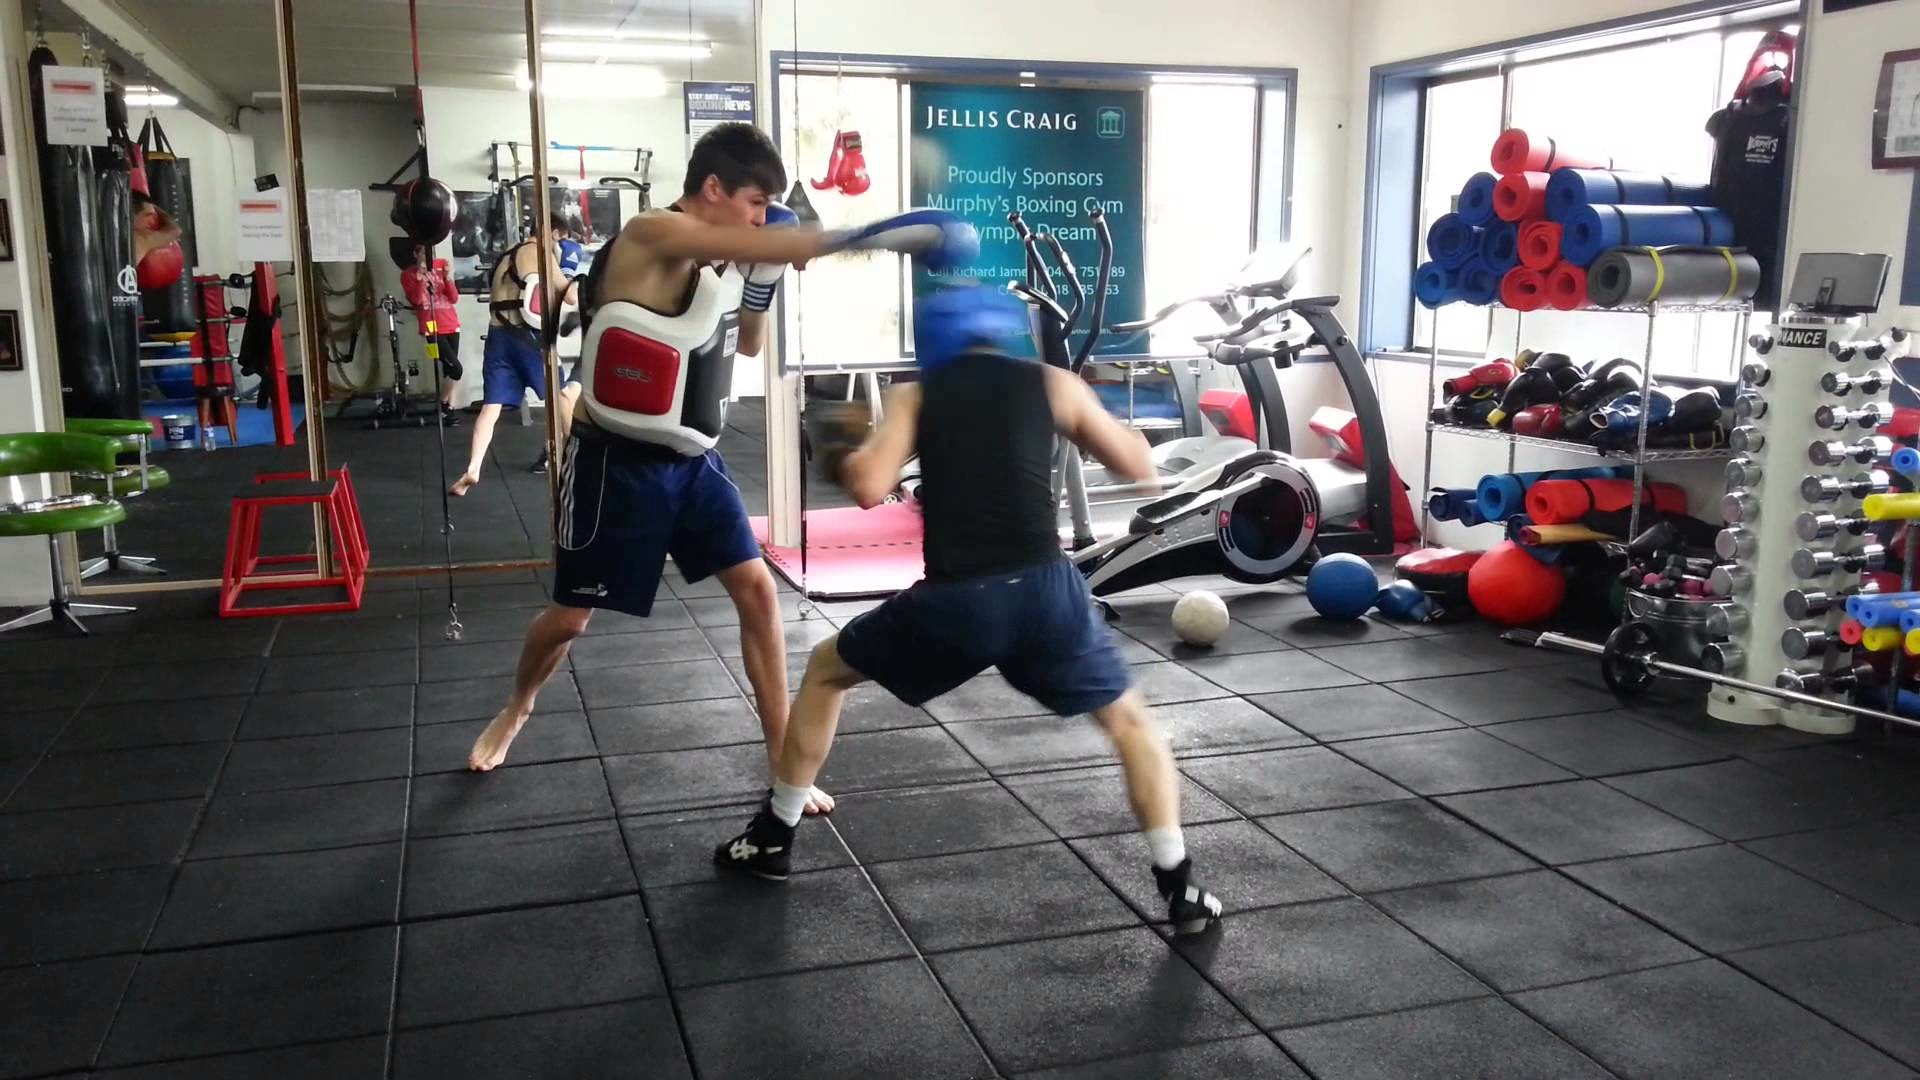 1920x1080 Boxing training at Murphy's Boxing gym.